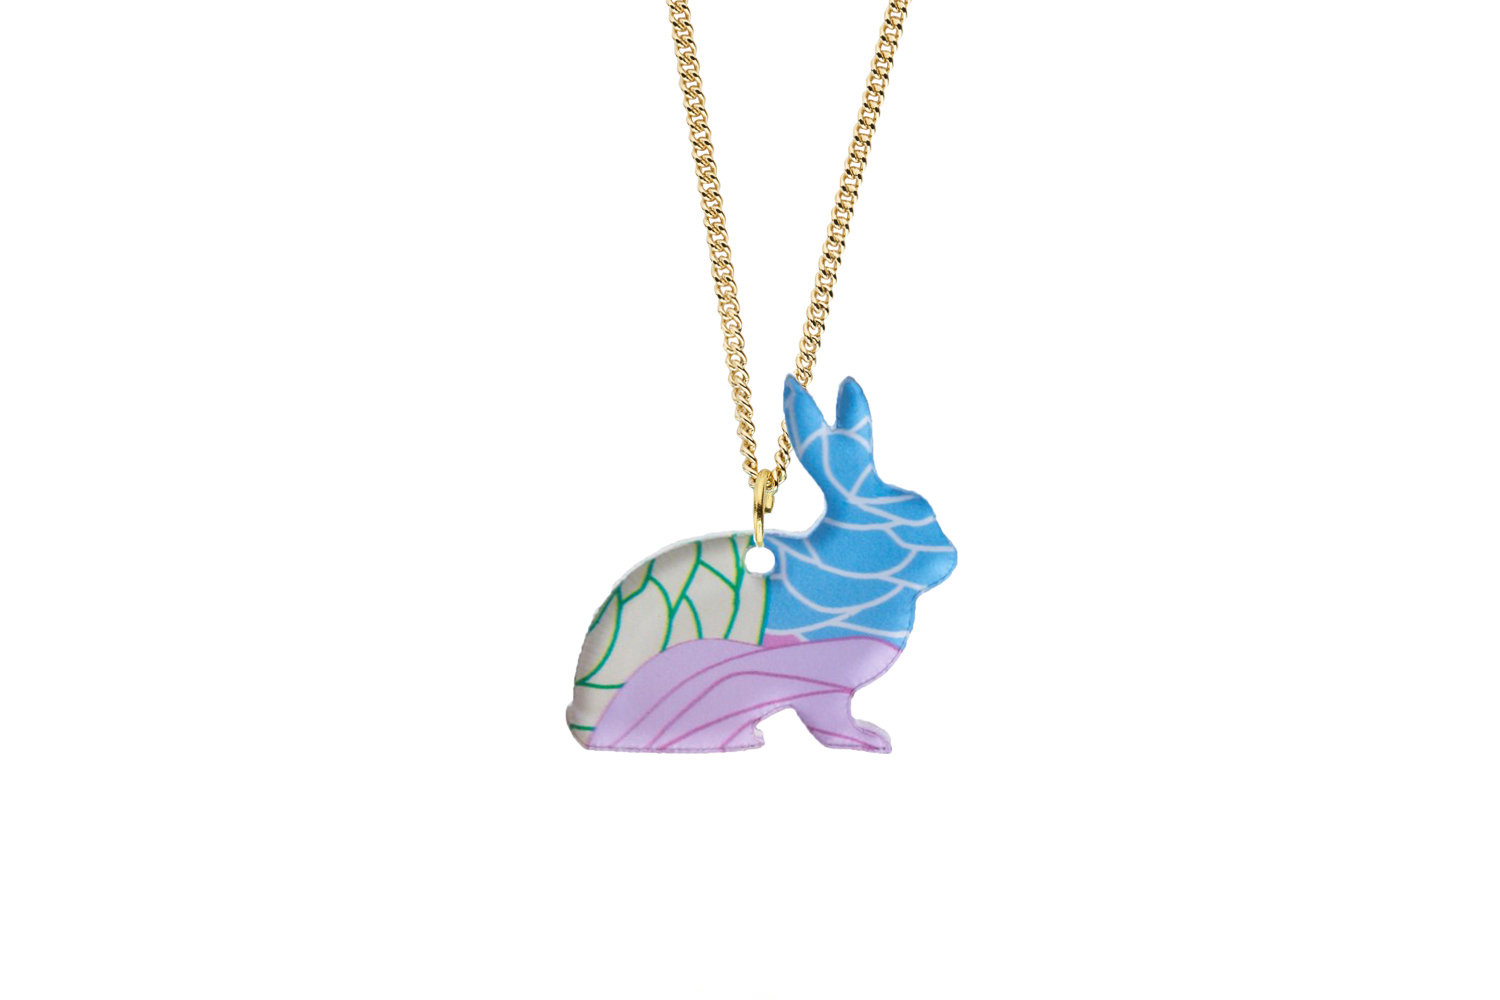 Bunny Pendant Sculpted Style on Chain Necklace